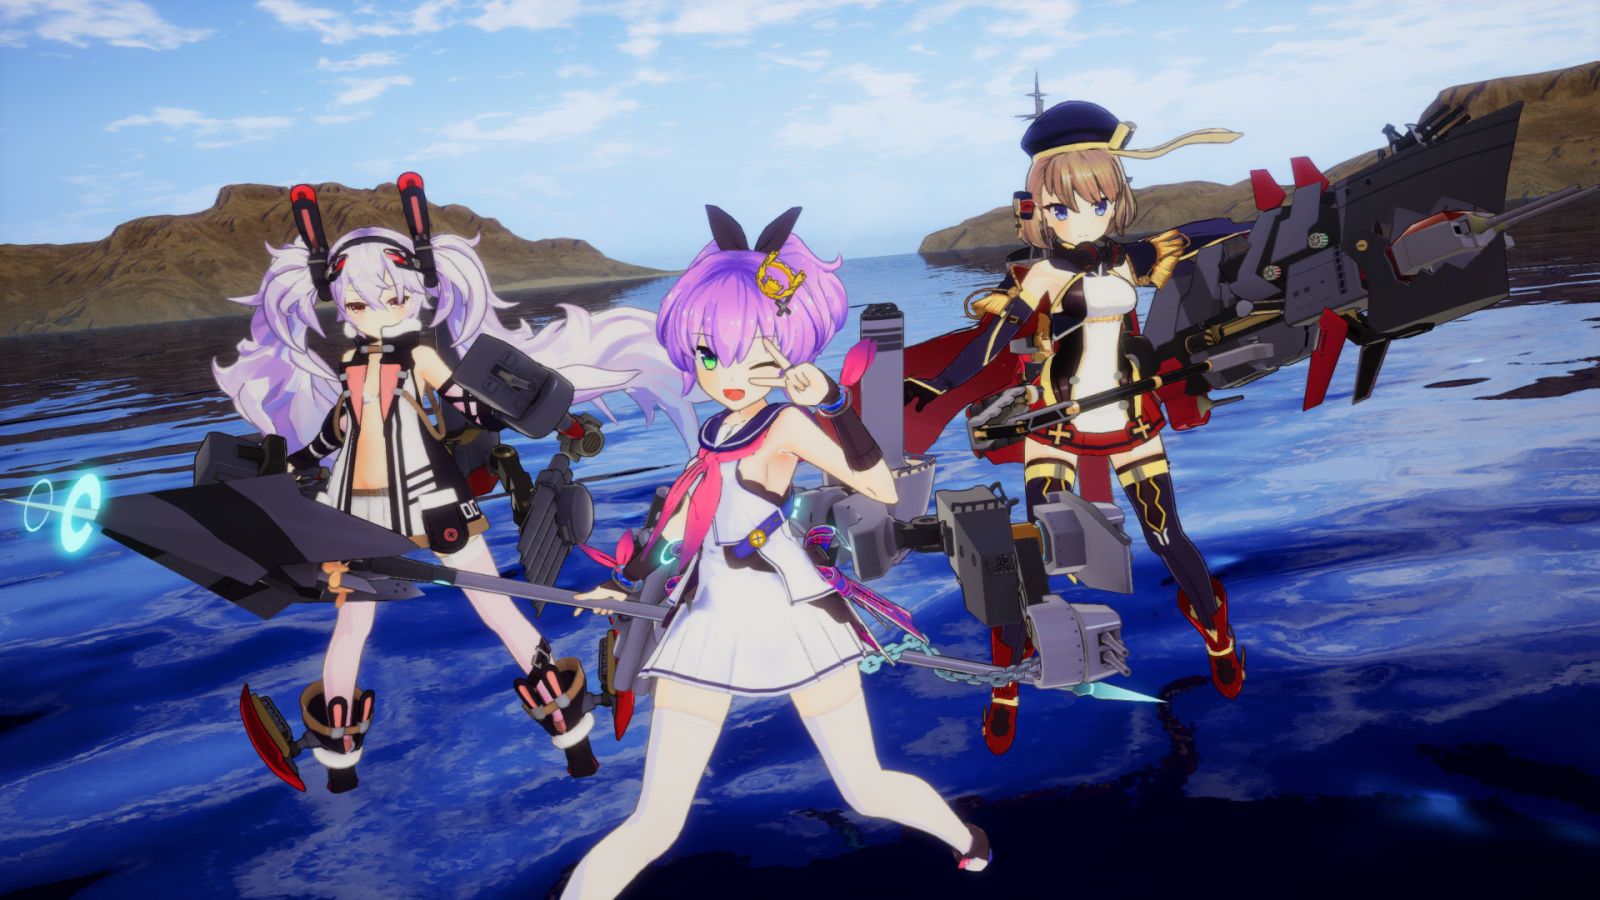 That Anime Women As Battleships Game Comes To PS4 And Steam Next Month